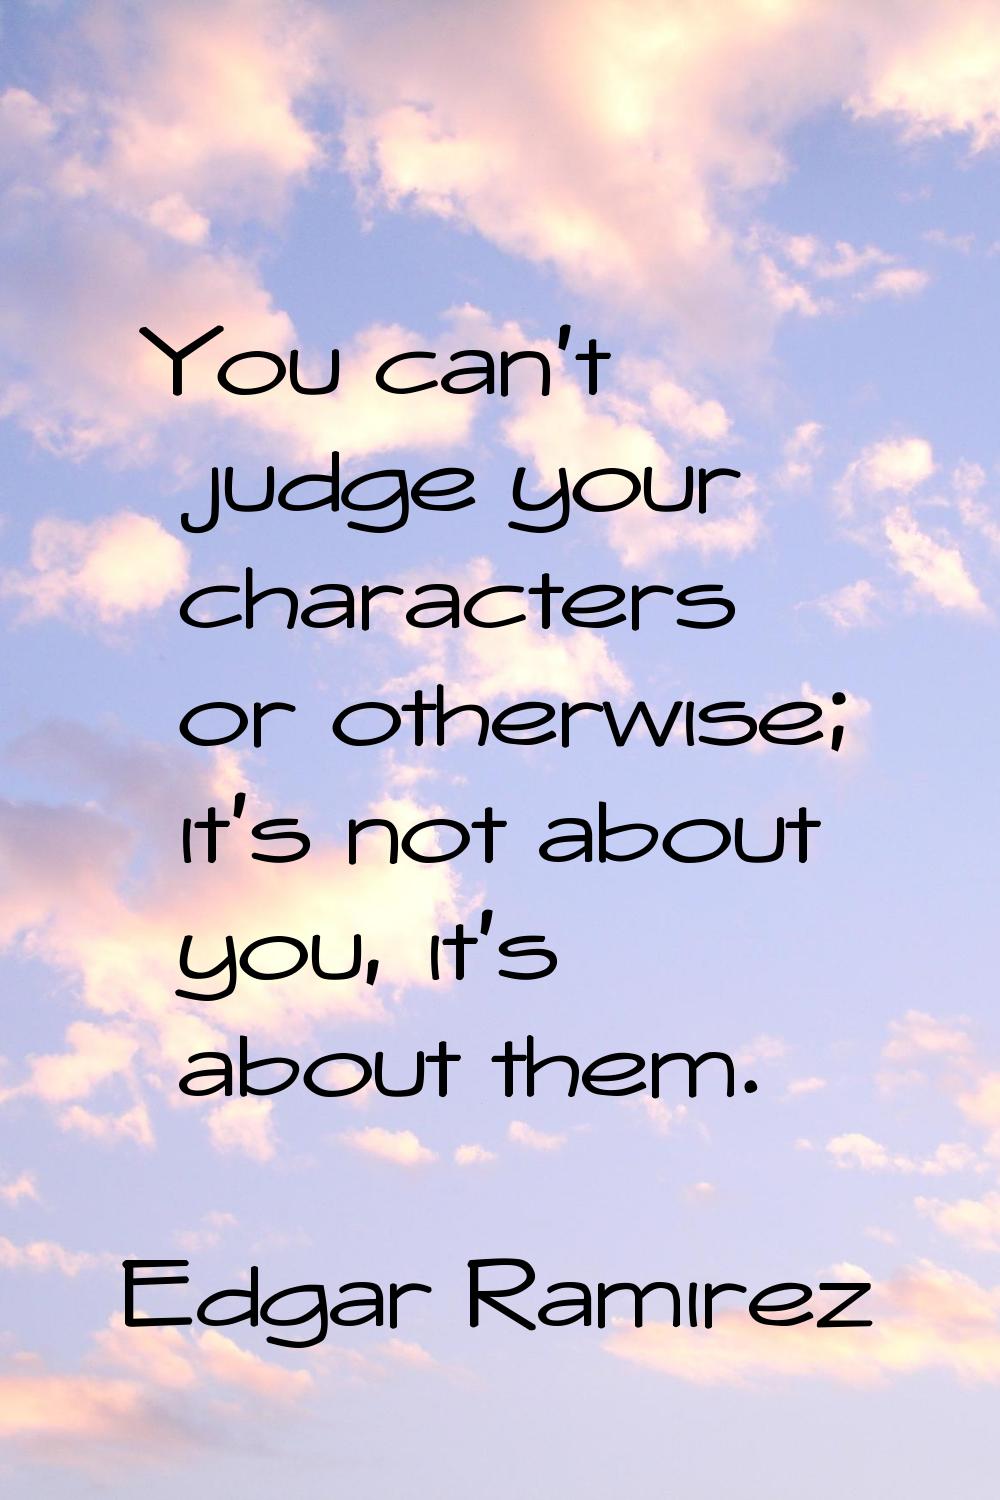 You can't judge your characters or otherwise; it's not about you, it's about them.